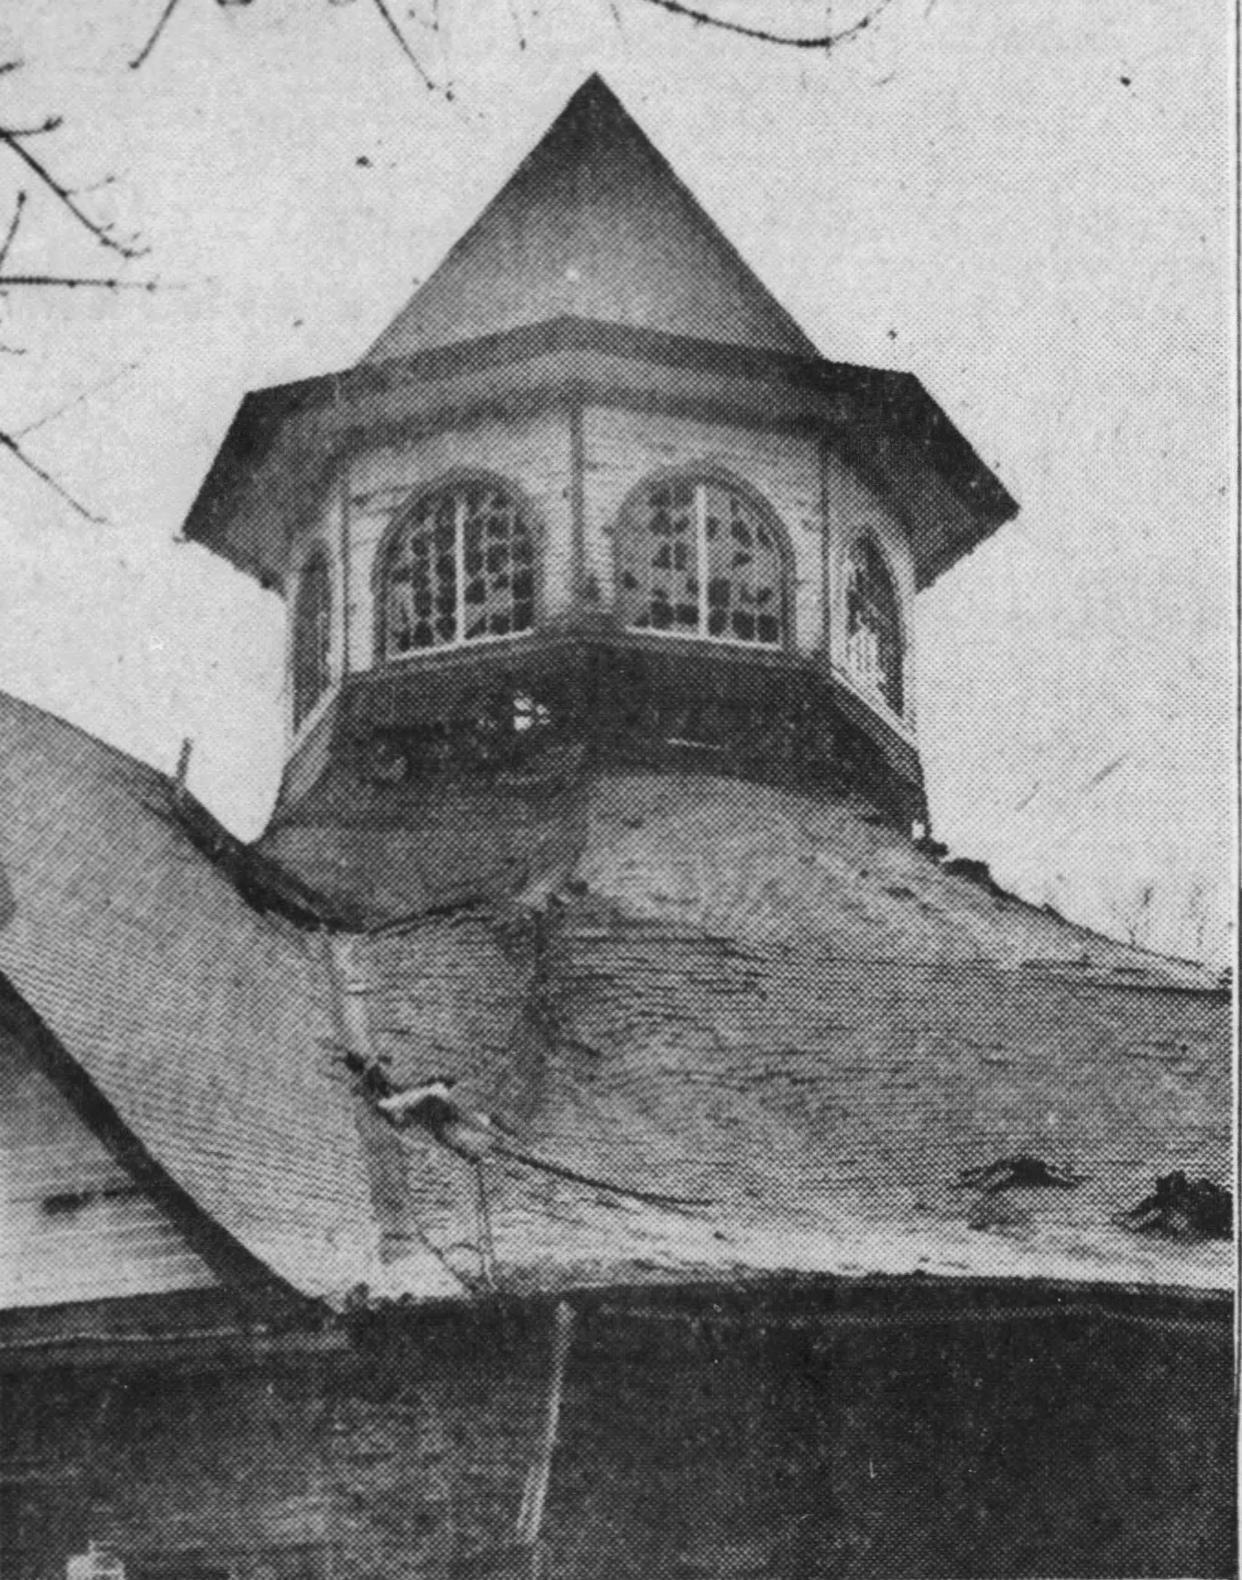 The remains of the casino building after a fire in 1948.